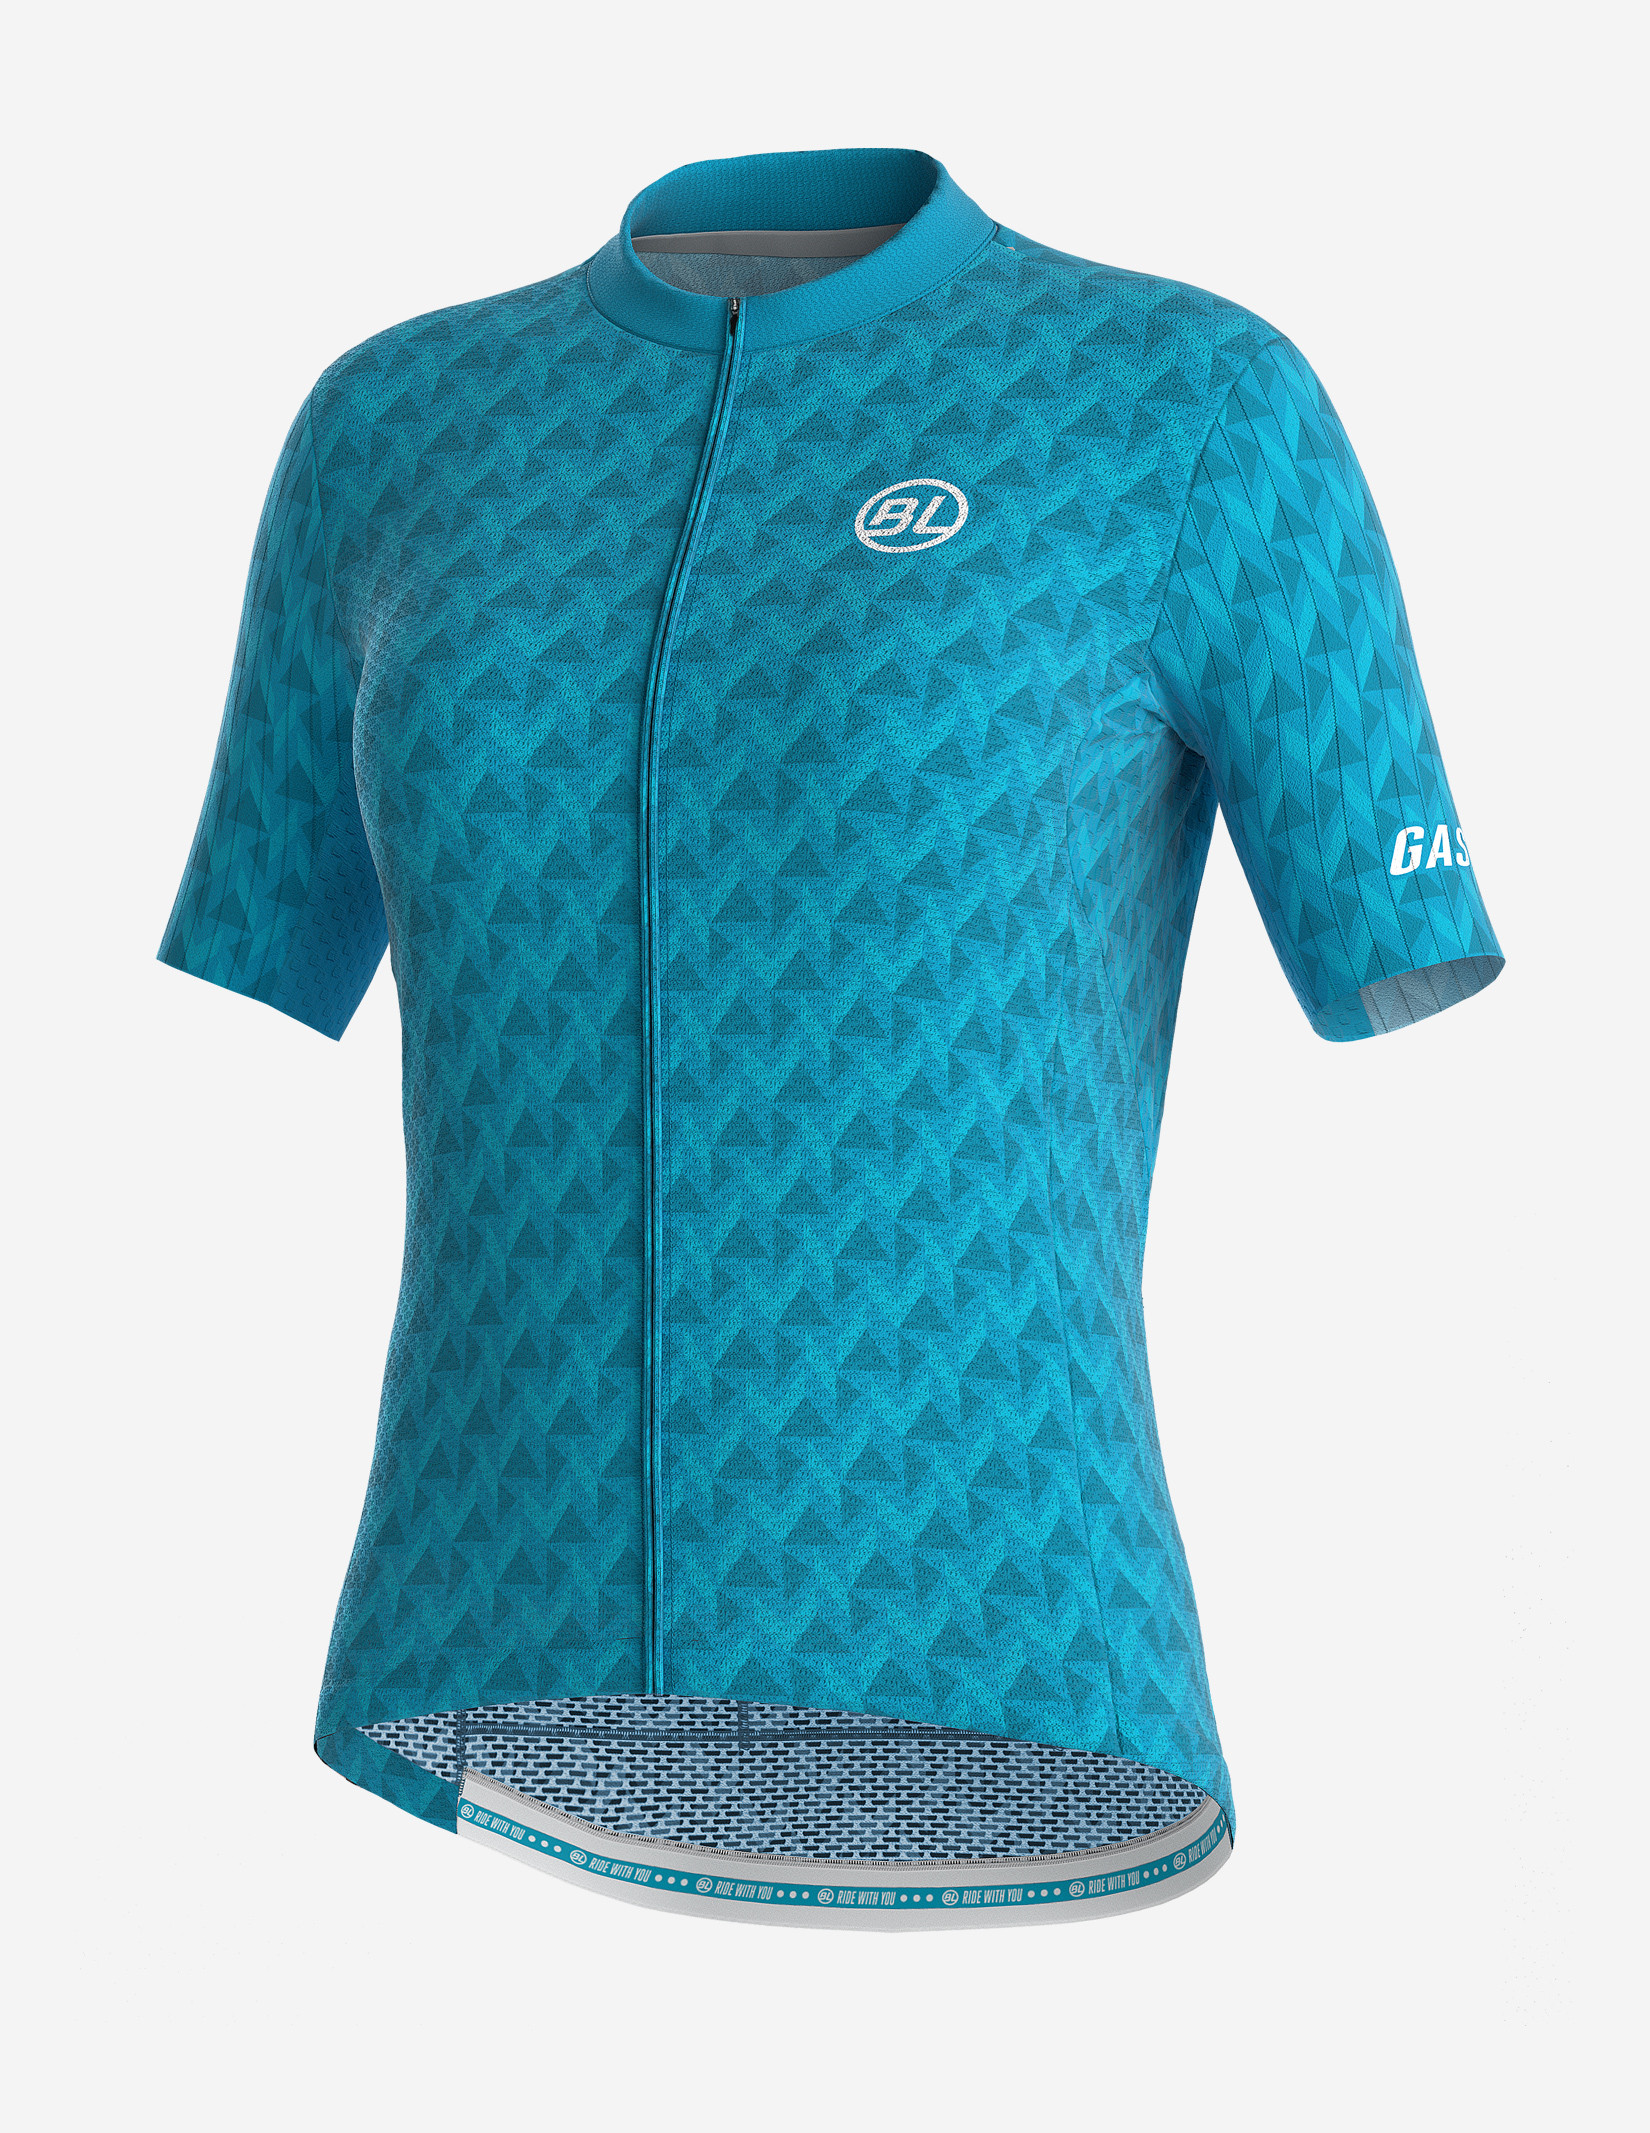 Maillot ciclismo mujer GAST-1